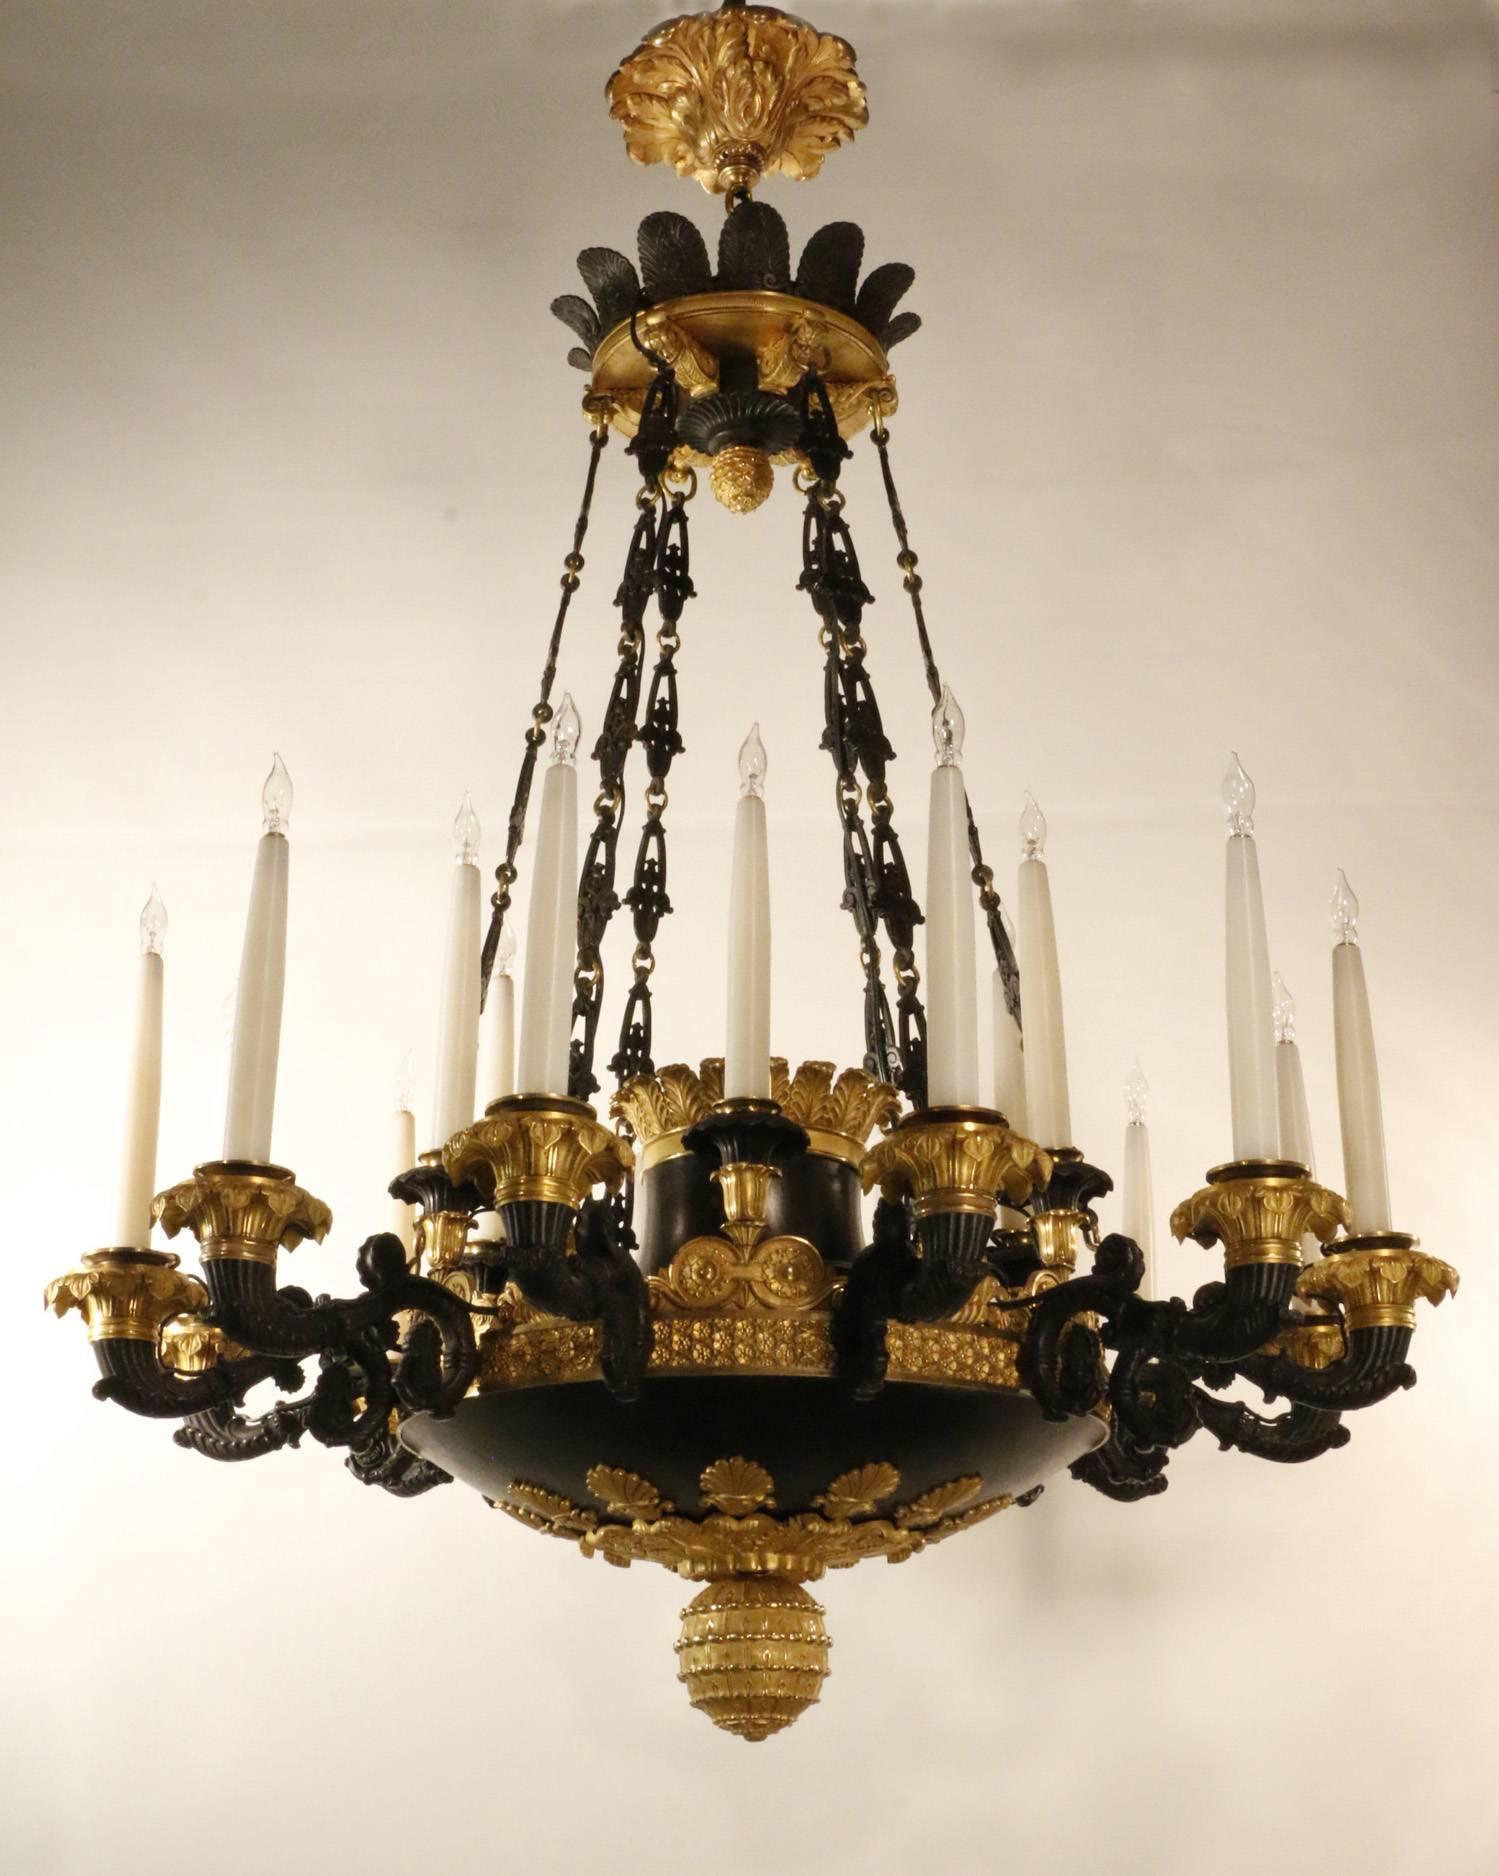 Spectacular French early 19th century bronze and ormolu chandelier, the 12 scrolling arms  molded with leaves and interspersed with six additional lights, the bronze body  partially gilded  and with gilt bobeches, stylized acanthus, garlands and